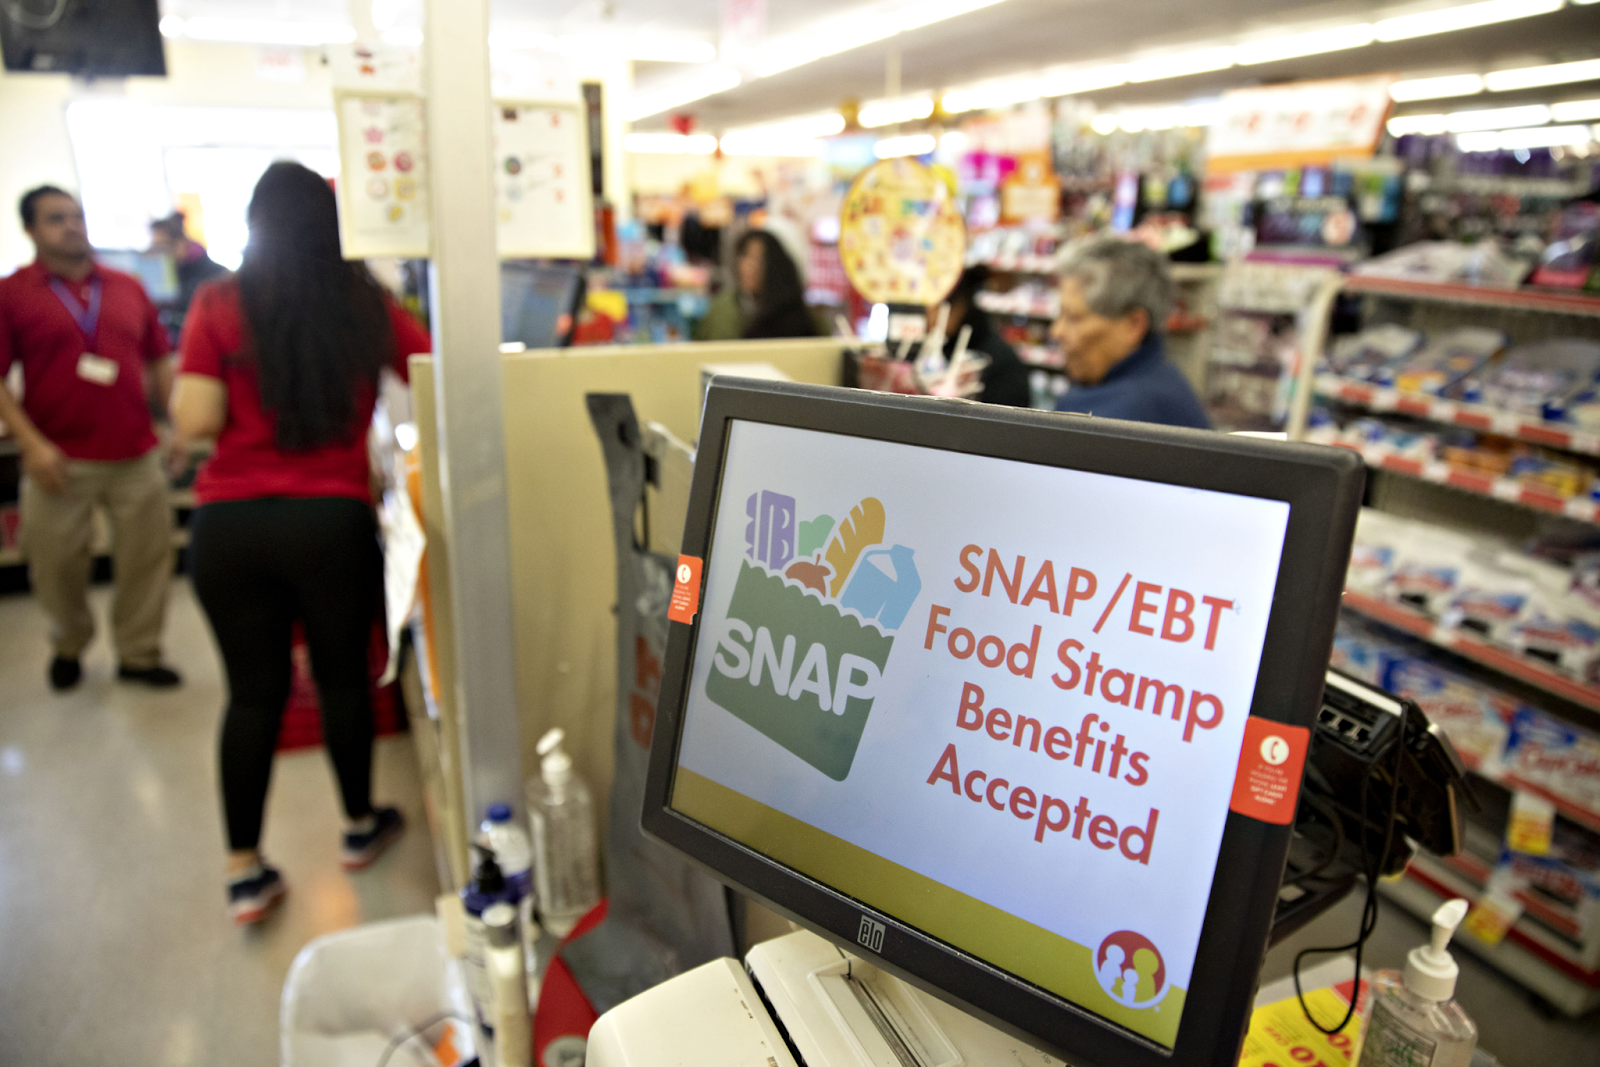 Find Out How to Apply and Who Can Receive SNAP Benefits Through the App (Oh SNAP)